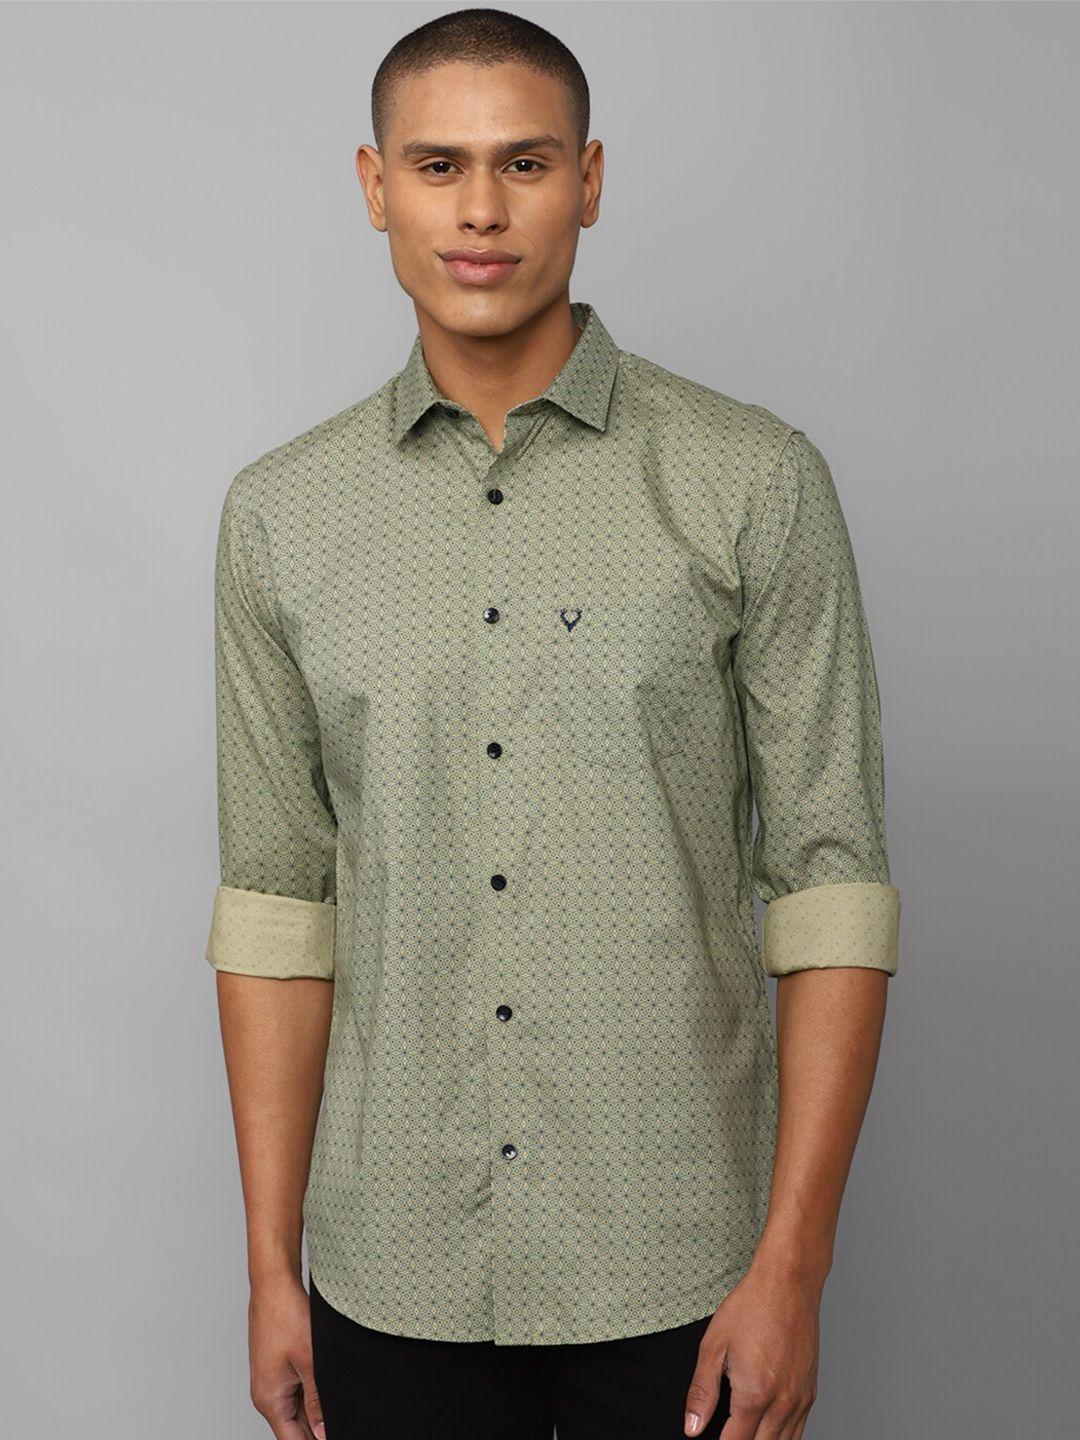 allen-solly-men-olive-green-slim-fit-printed-pure-cotton-casual-shirt